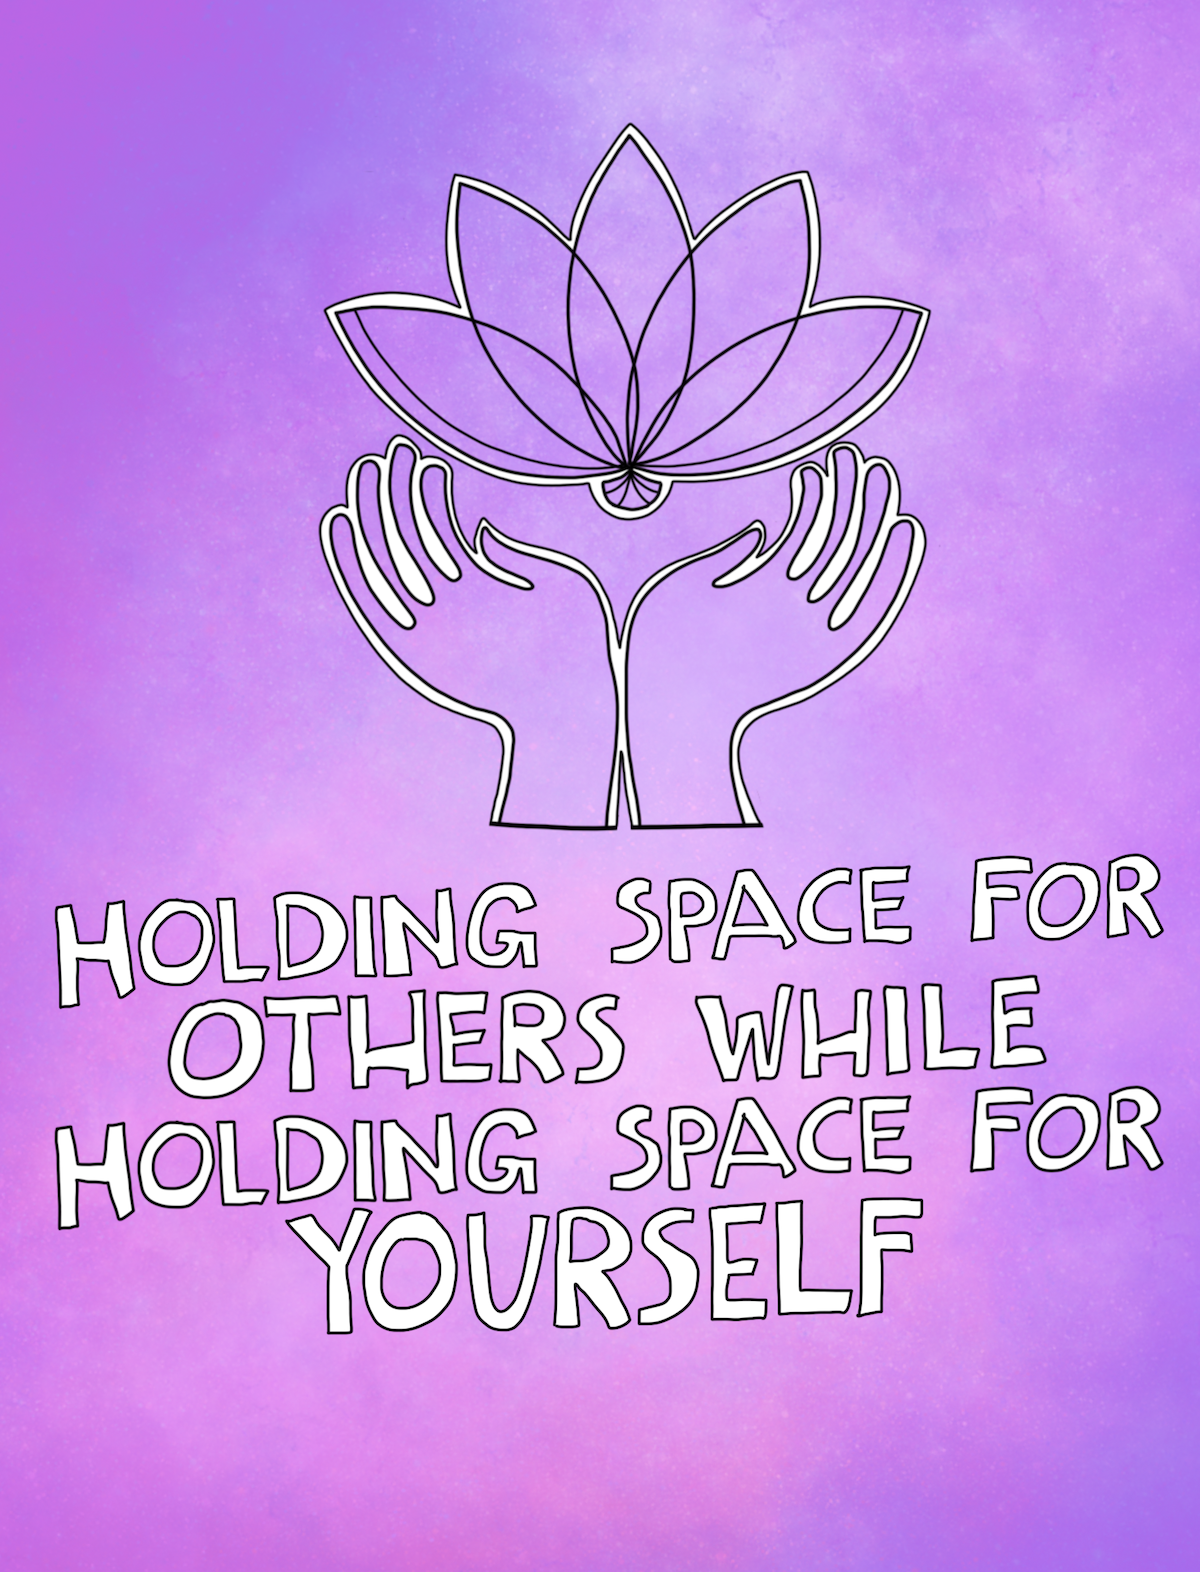 Holding Space for Yourself While Holding Space For Others